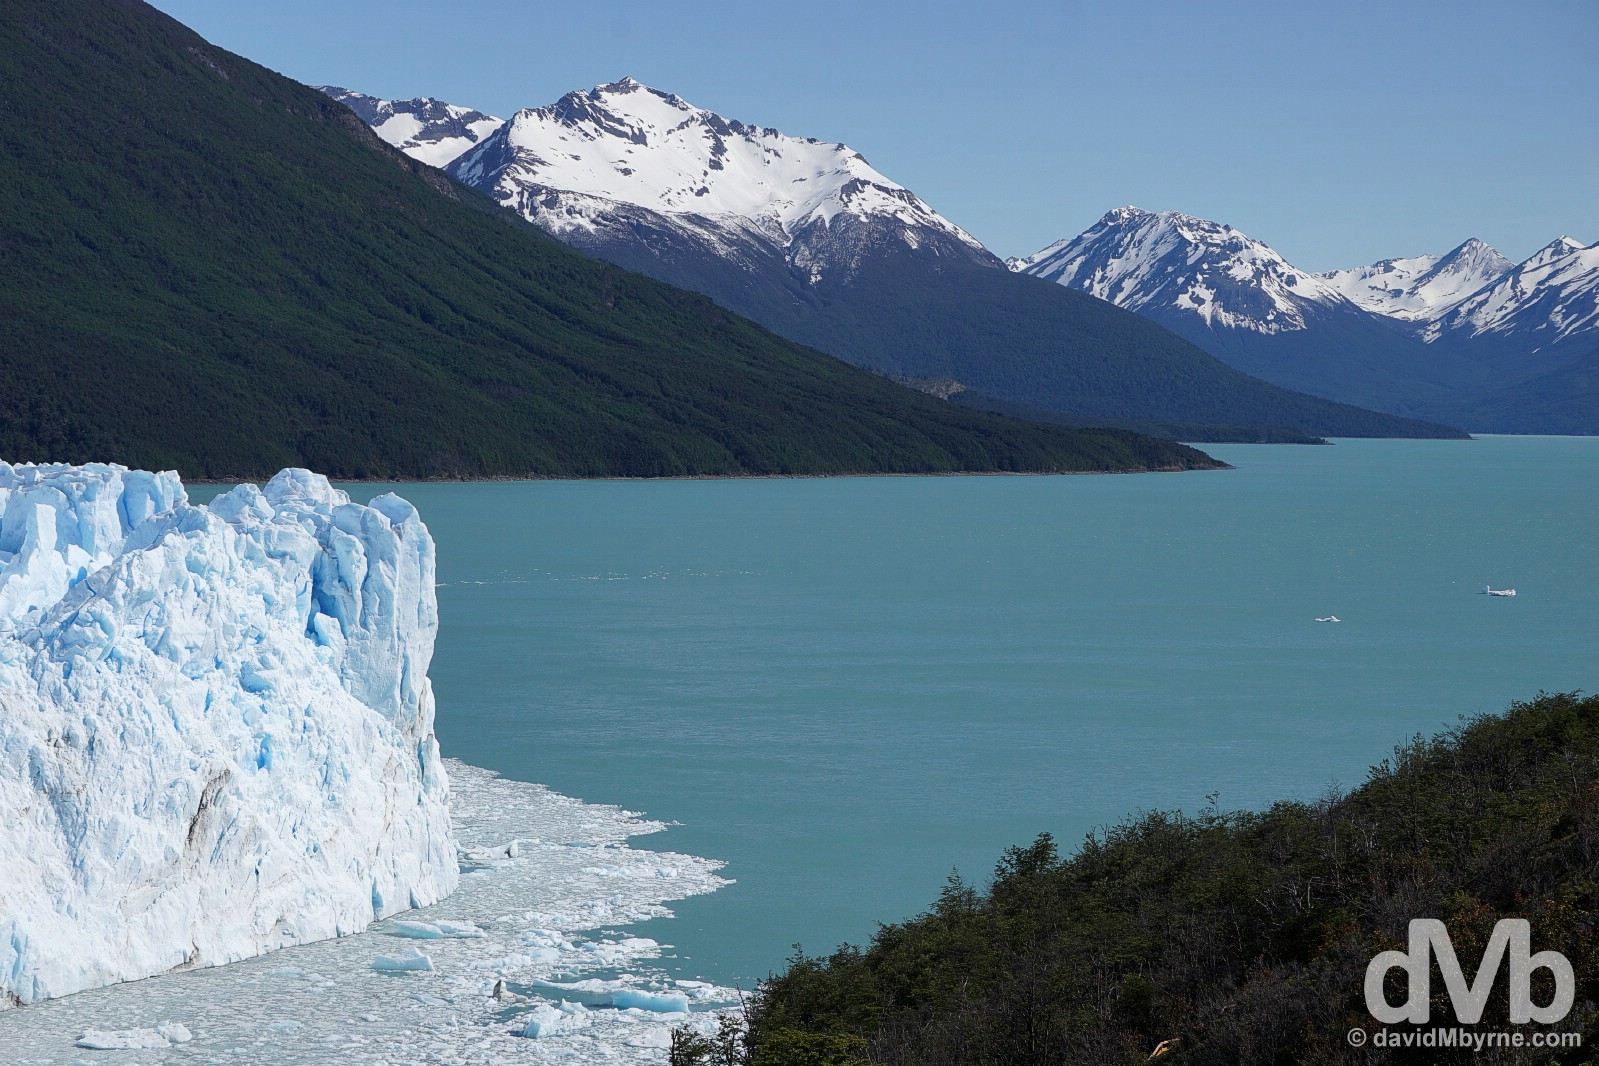 The 60 metre-high snout of the Perito Moreno Glacier, the Canal de los Tempanos (Iceberg Channel) & Lago Argentino as seen from the system of elevated walkways on Peninsula Magallanes of Parque Nacional Los Glaciares, southern Patagonia, Argentina. November 2, 2015.